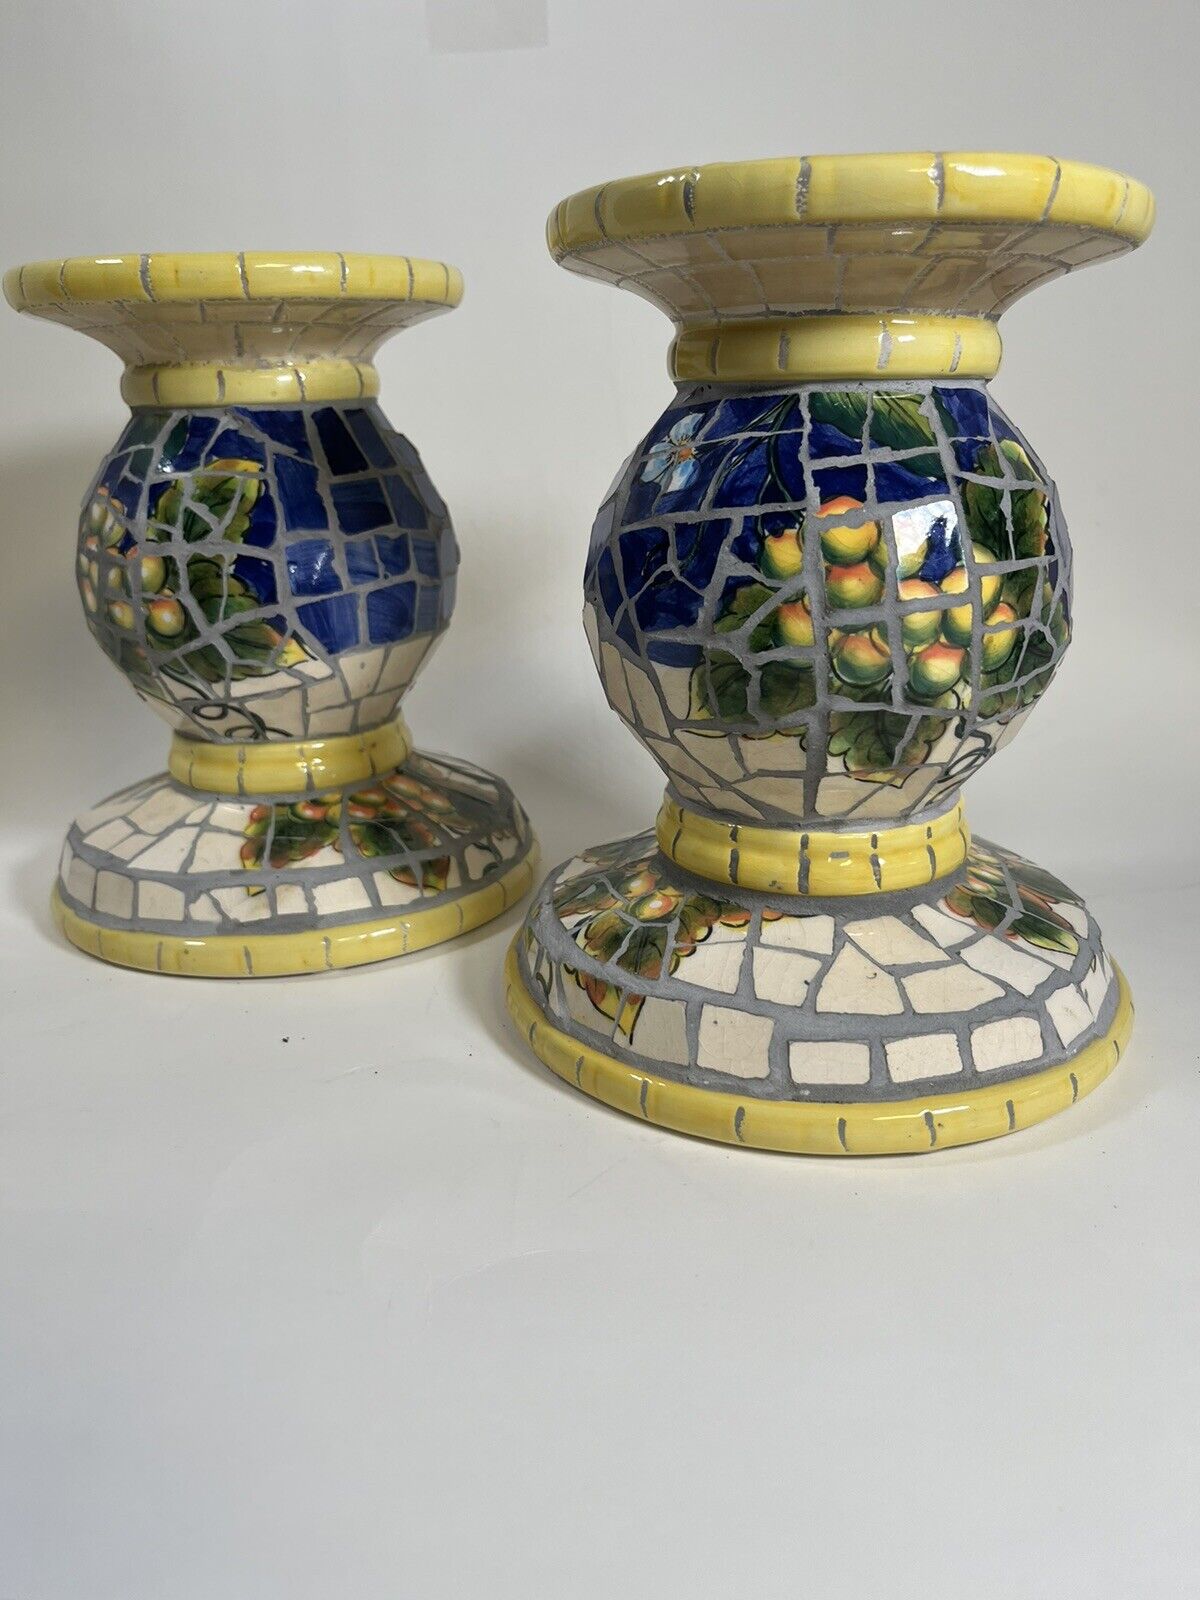 Handmade Ceramic Mosaic Two Candle Holder Base 7 1/2 in x 5 in Blue Yellow